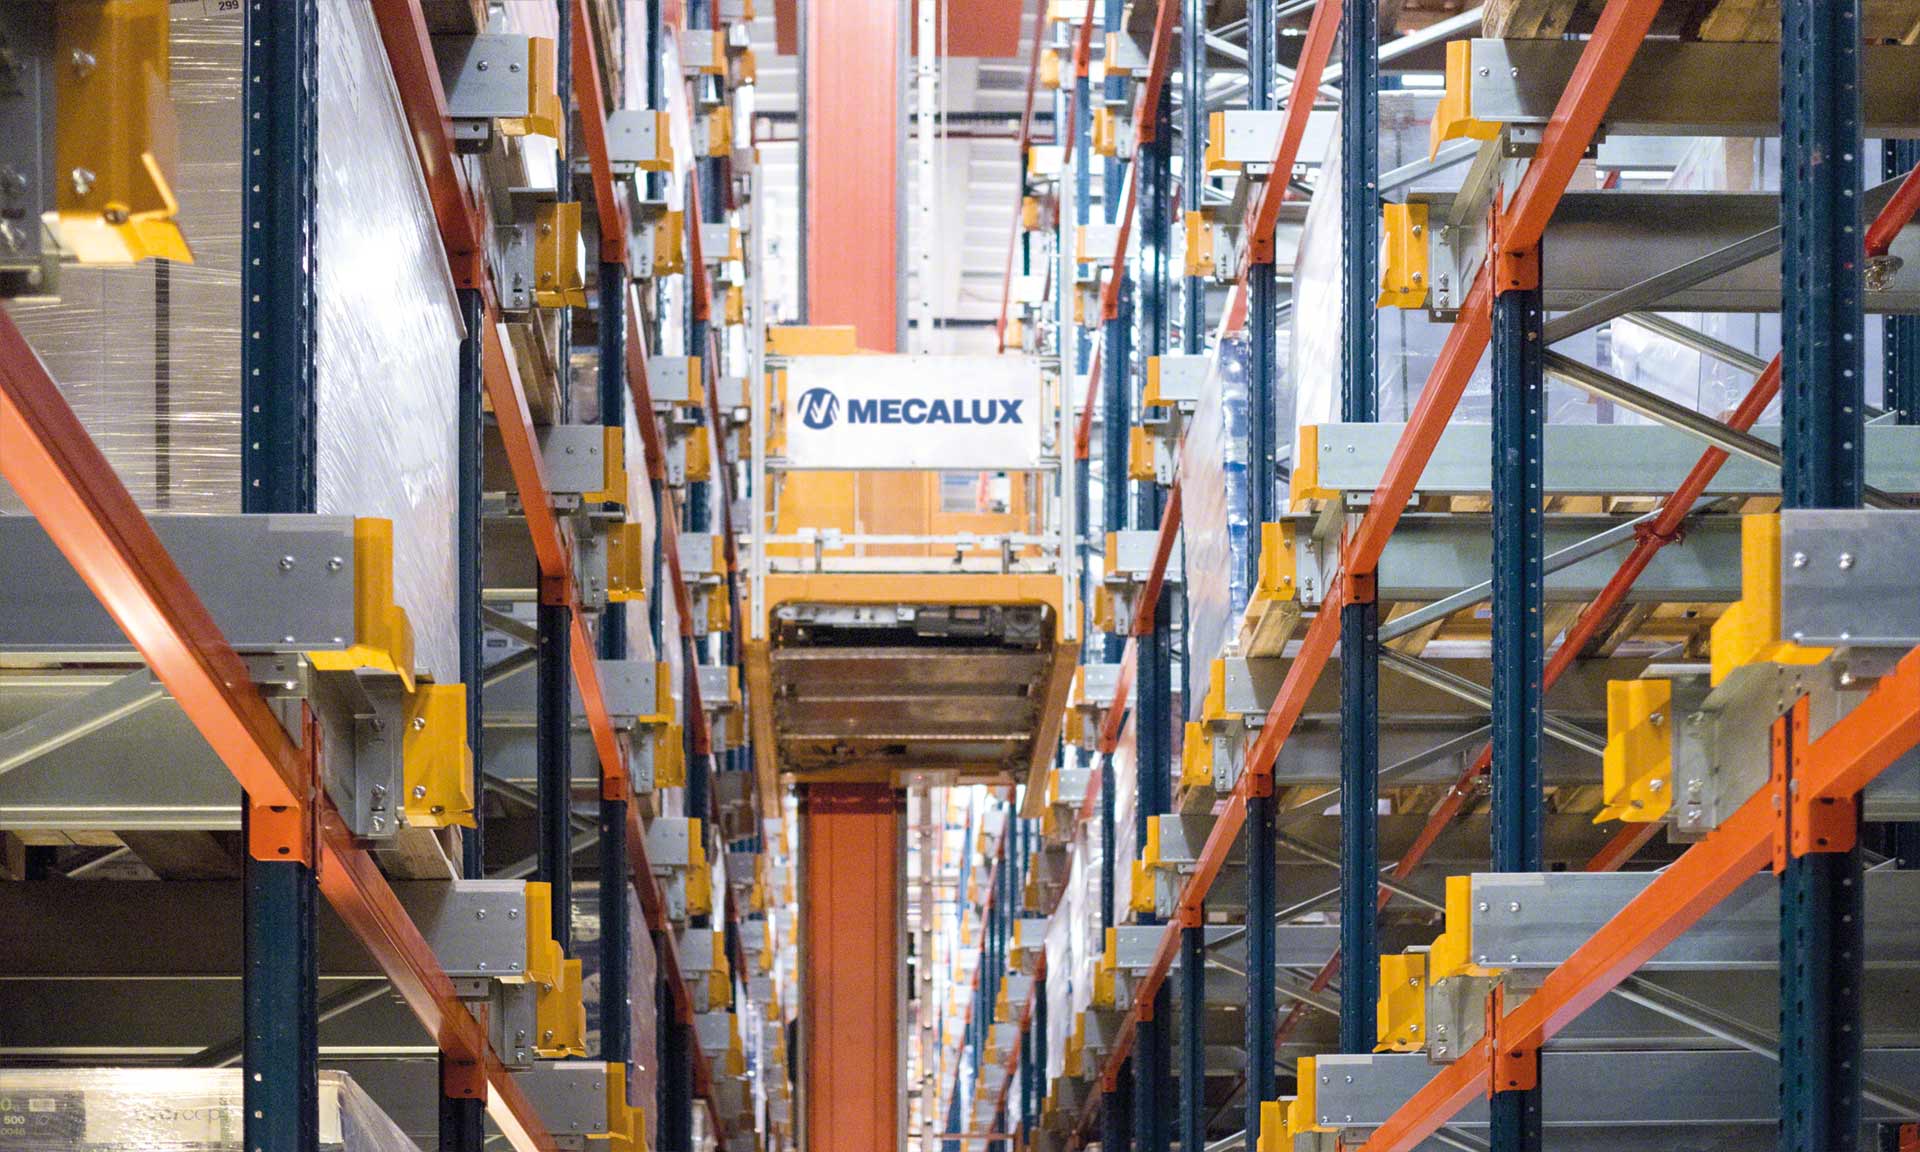 Automated systems provide tight control of the goods stored